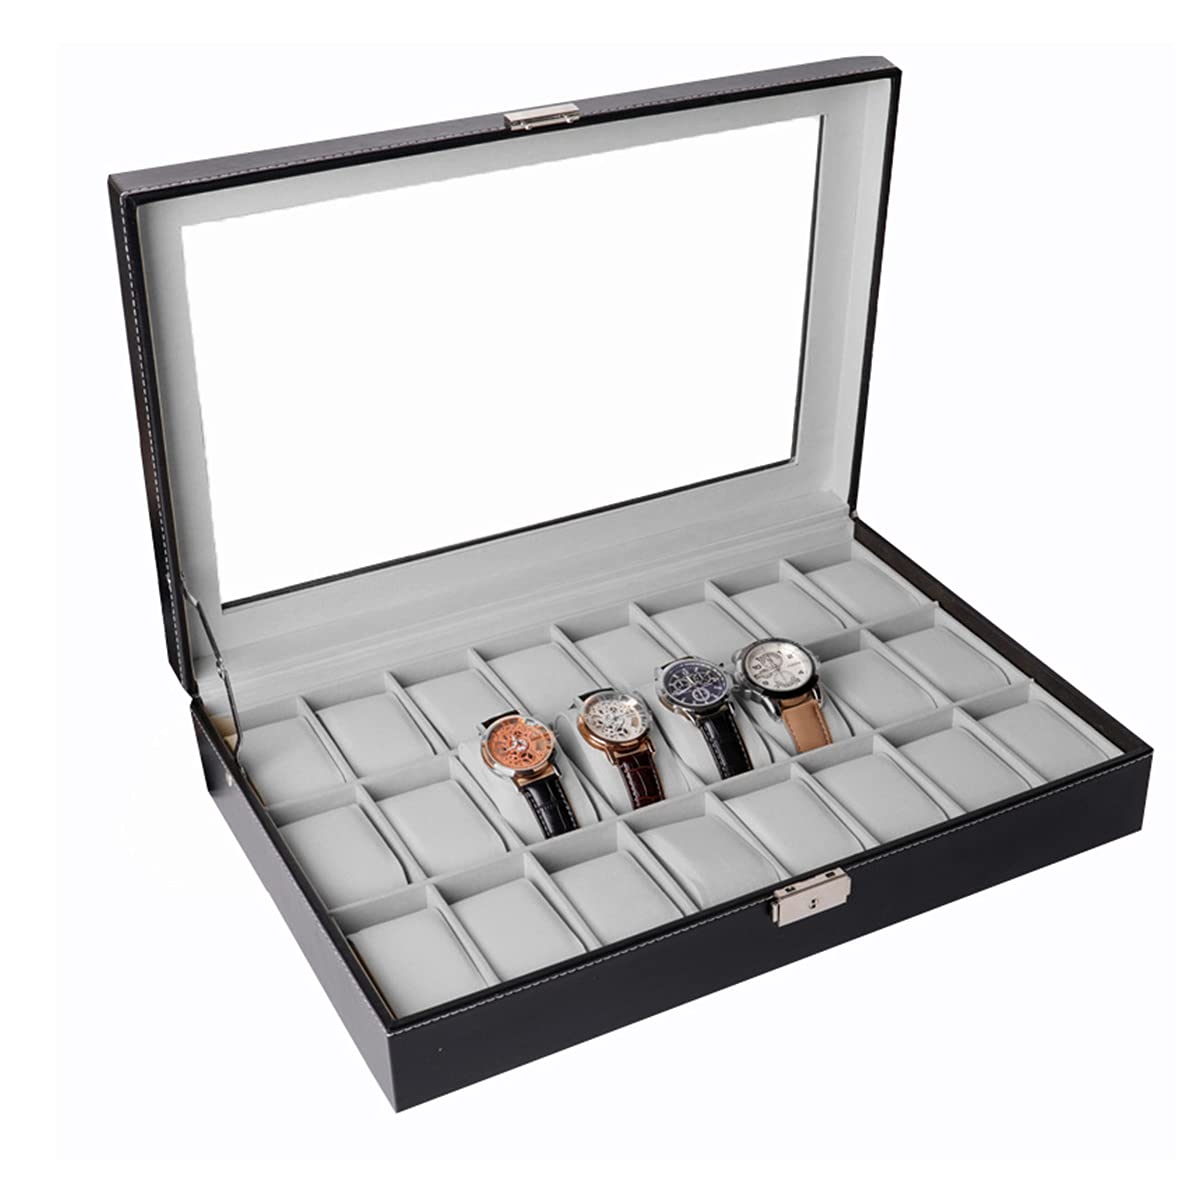 HUAXXIA Watch Box 24 Slots Jewelry Case for Men, Watch Case Lockable Storage Organizer with Clear Top, Removable Pillow Velvet Lining, Outstanding PU Leather, Big Collection Box Christmas Gift